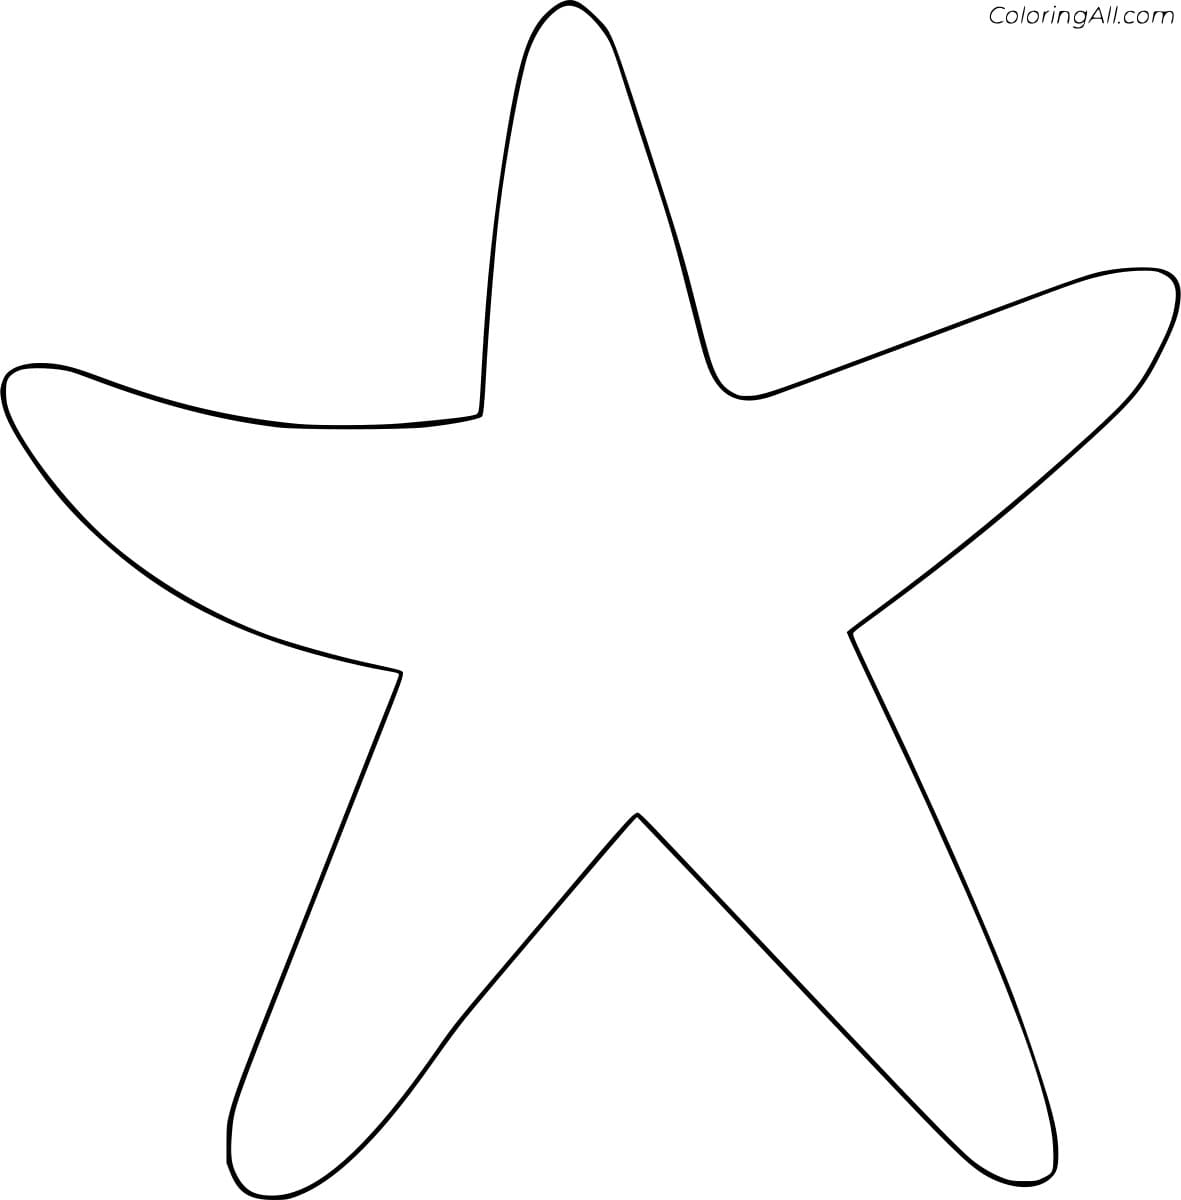 Outline Starfish Image Coloring Page